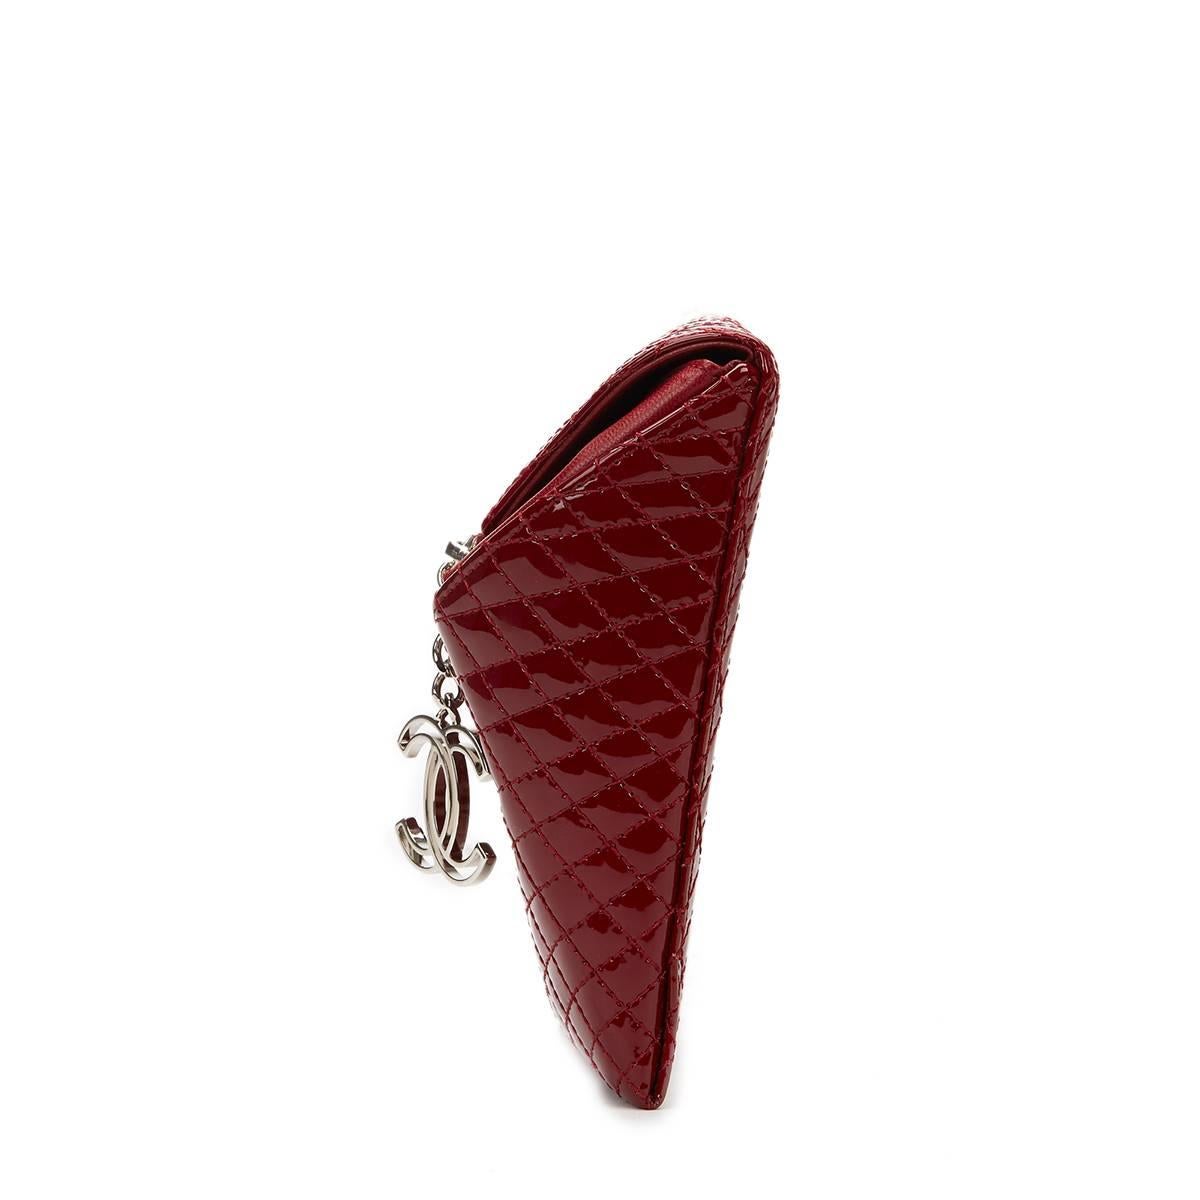 CHANEL
Burgundy Quilted Patent Leather Geometric Clutch

This CHANEL Geometric Clutch is in Excellent Pre-Owned Condition accompanied by Chanel Dust Bag. Circa 2009. Primarily made from Patent Leather complimented by Silver hardware. Our  reference